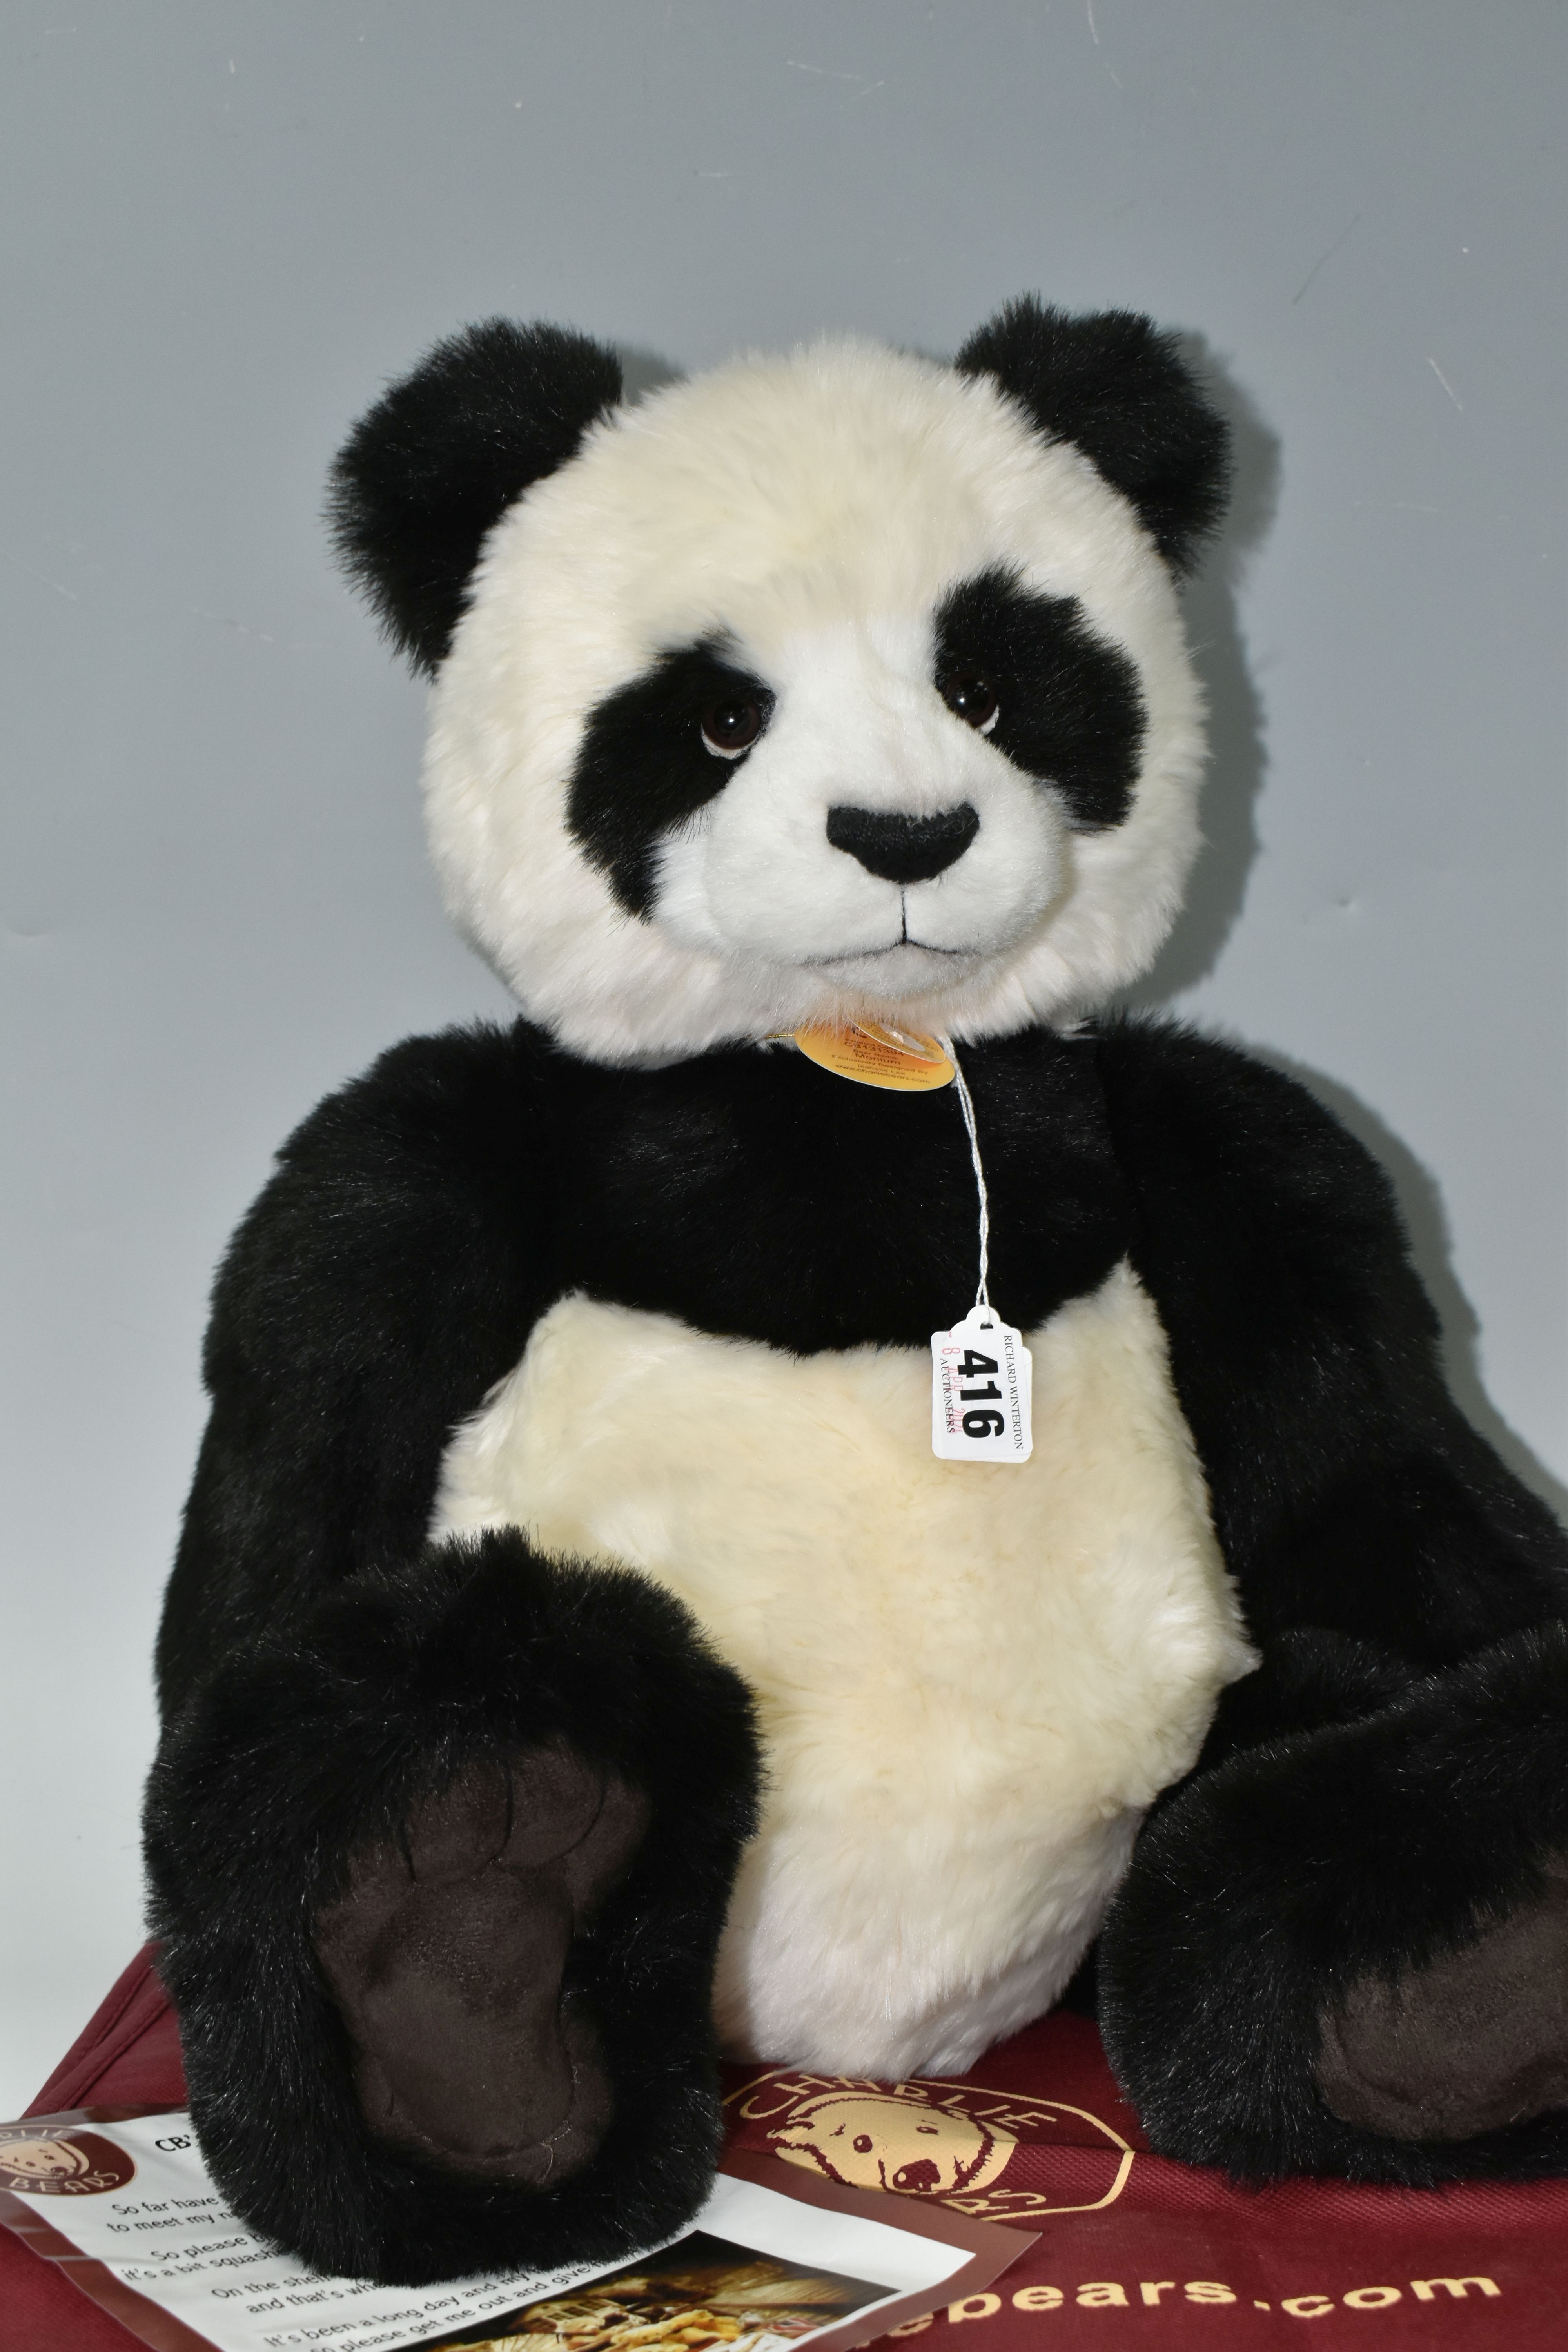 A CHARLIE BEAR PANDA 'MONIUM' CB131394, exclusively designed by Isabelle Lee, height approx. 58cm, - Image 2 of 3